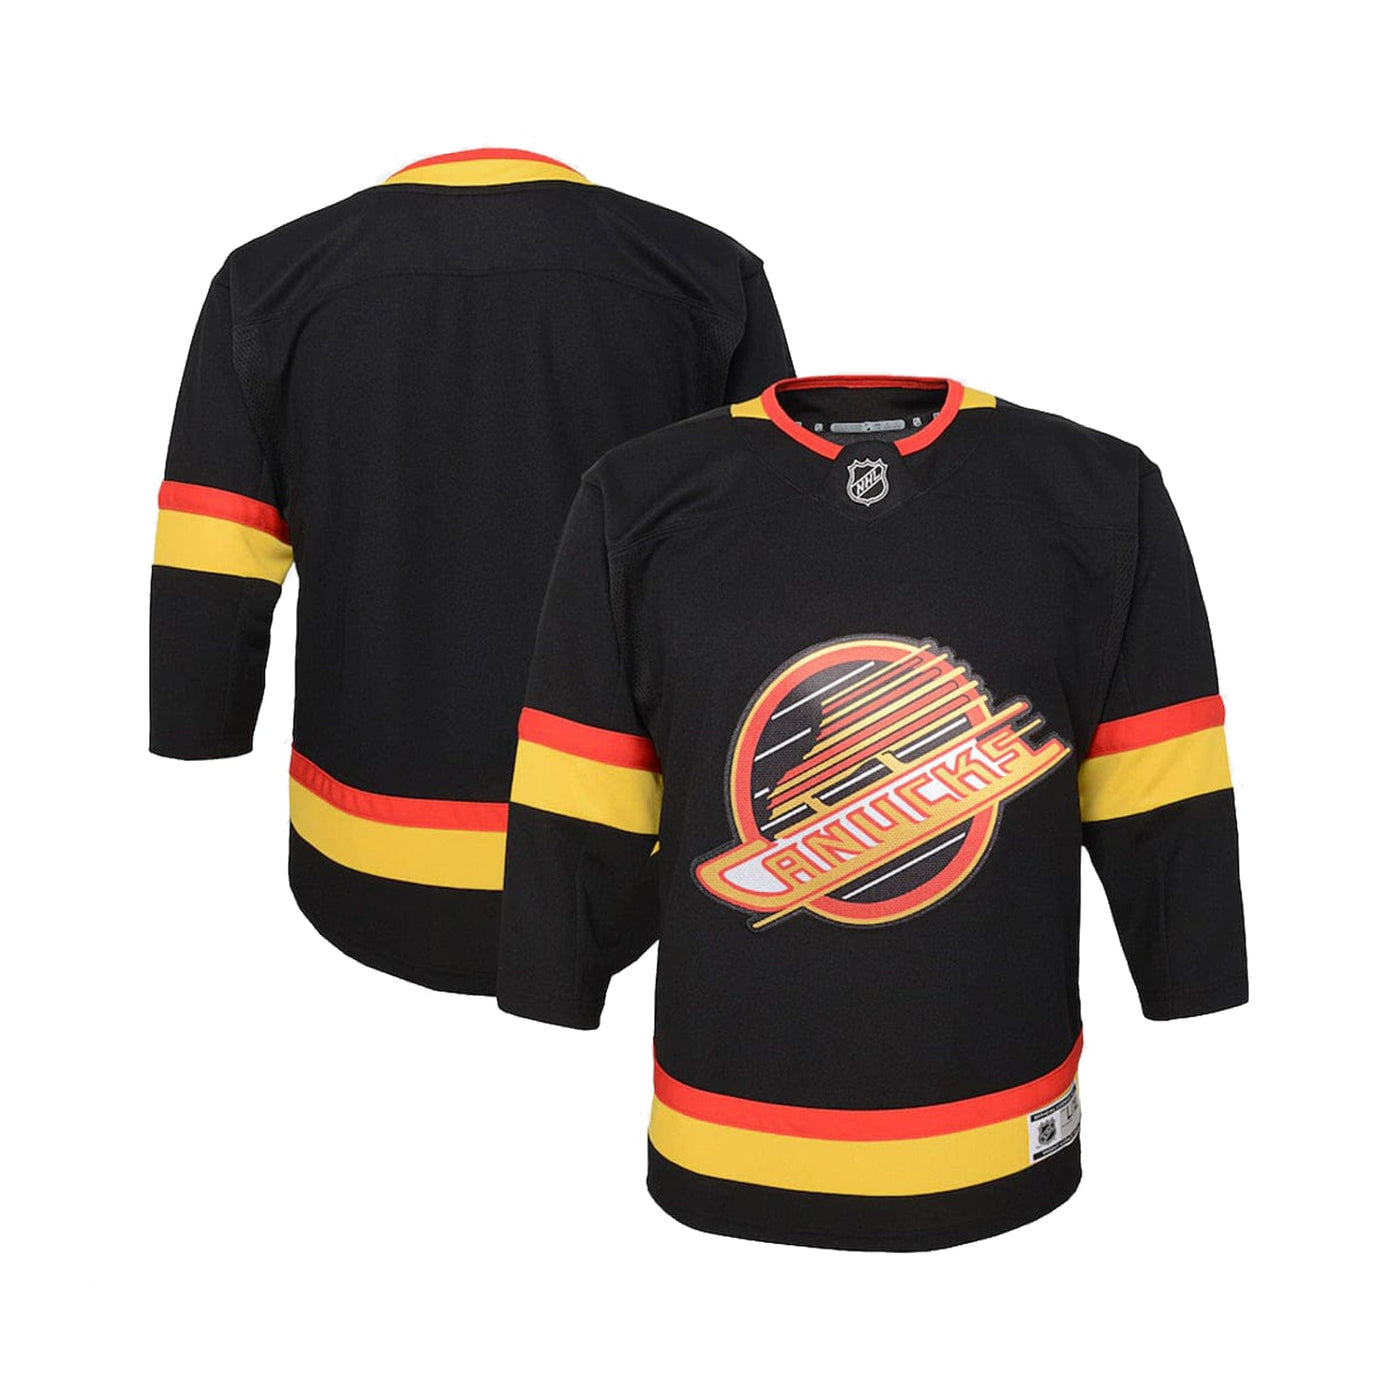 Vancouver Canucks Skate Outer Stuff Premier Toddler Jersey - The Hockey Shop Source For Sports